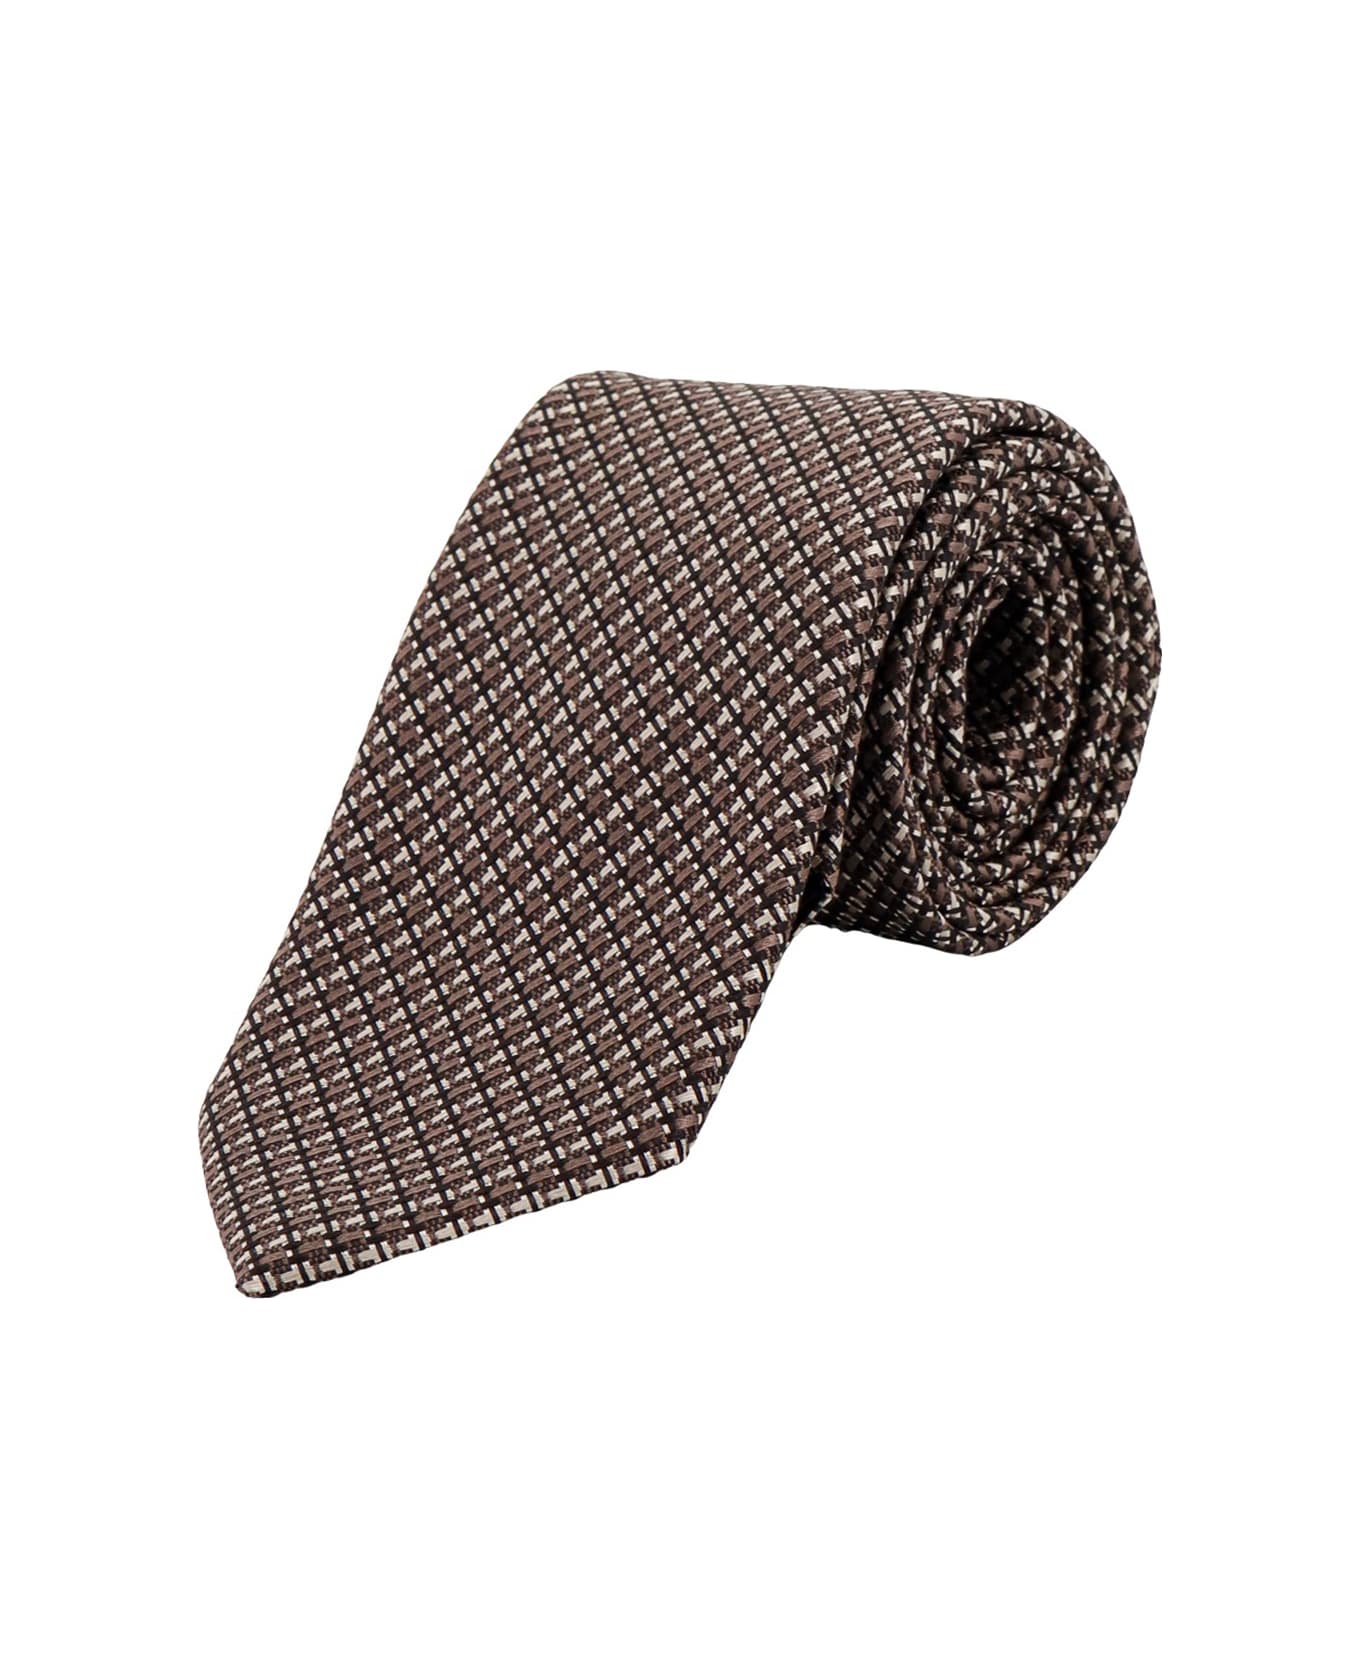 Tom Ford Tie - Brown ネクタイ